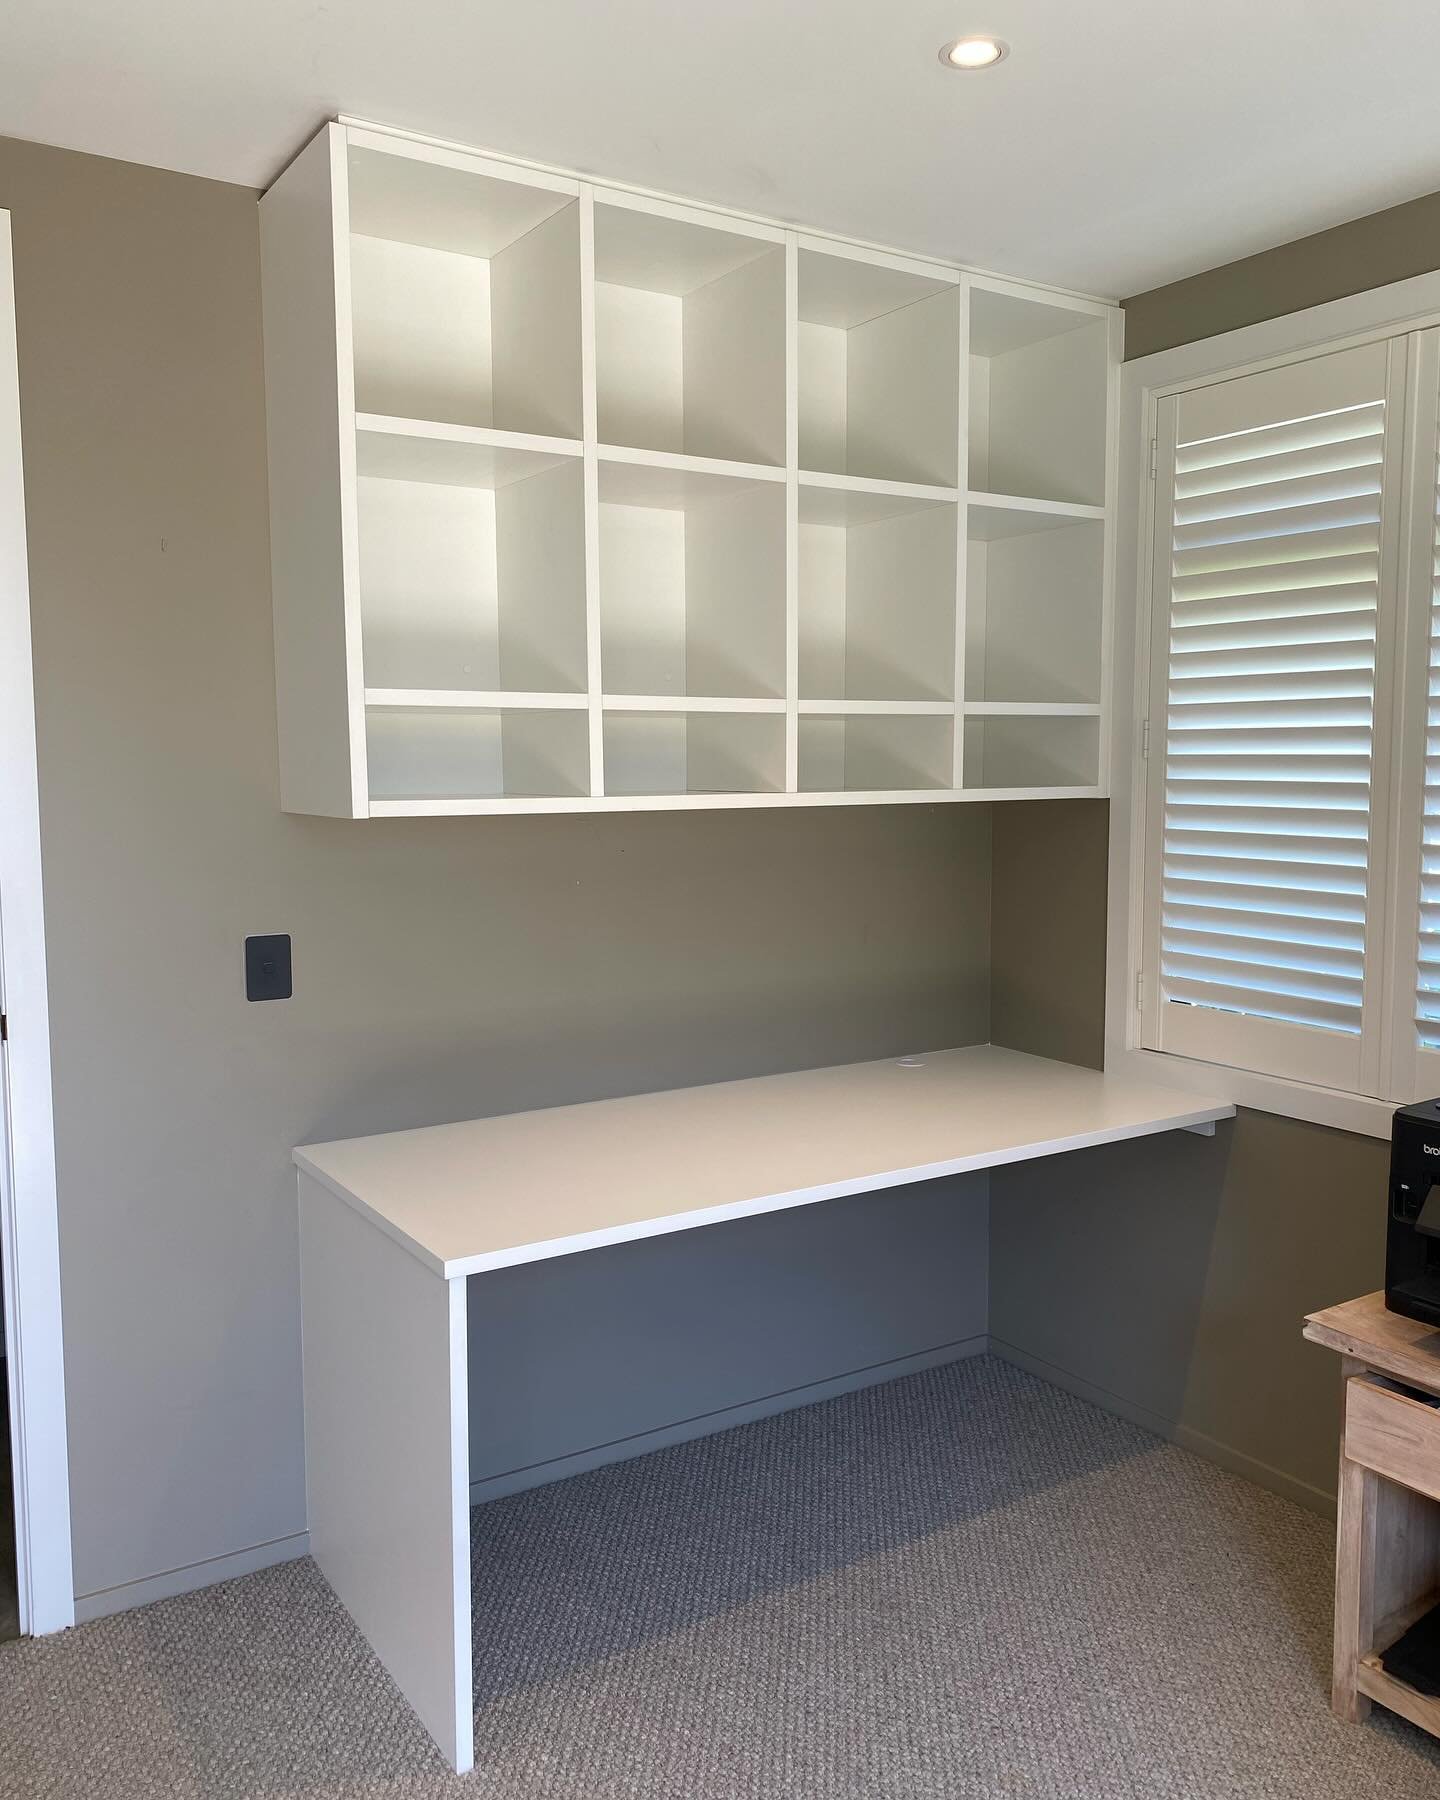 His &amp; hers office cabinetry 🙌🏽

Our clients loved the look of cubbies to use in their office space, which makes for so much room to store folders and add a bit of decor too. 

#customcabinetry #officejoinery #residentialjoinery #kitchenjoinery 